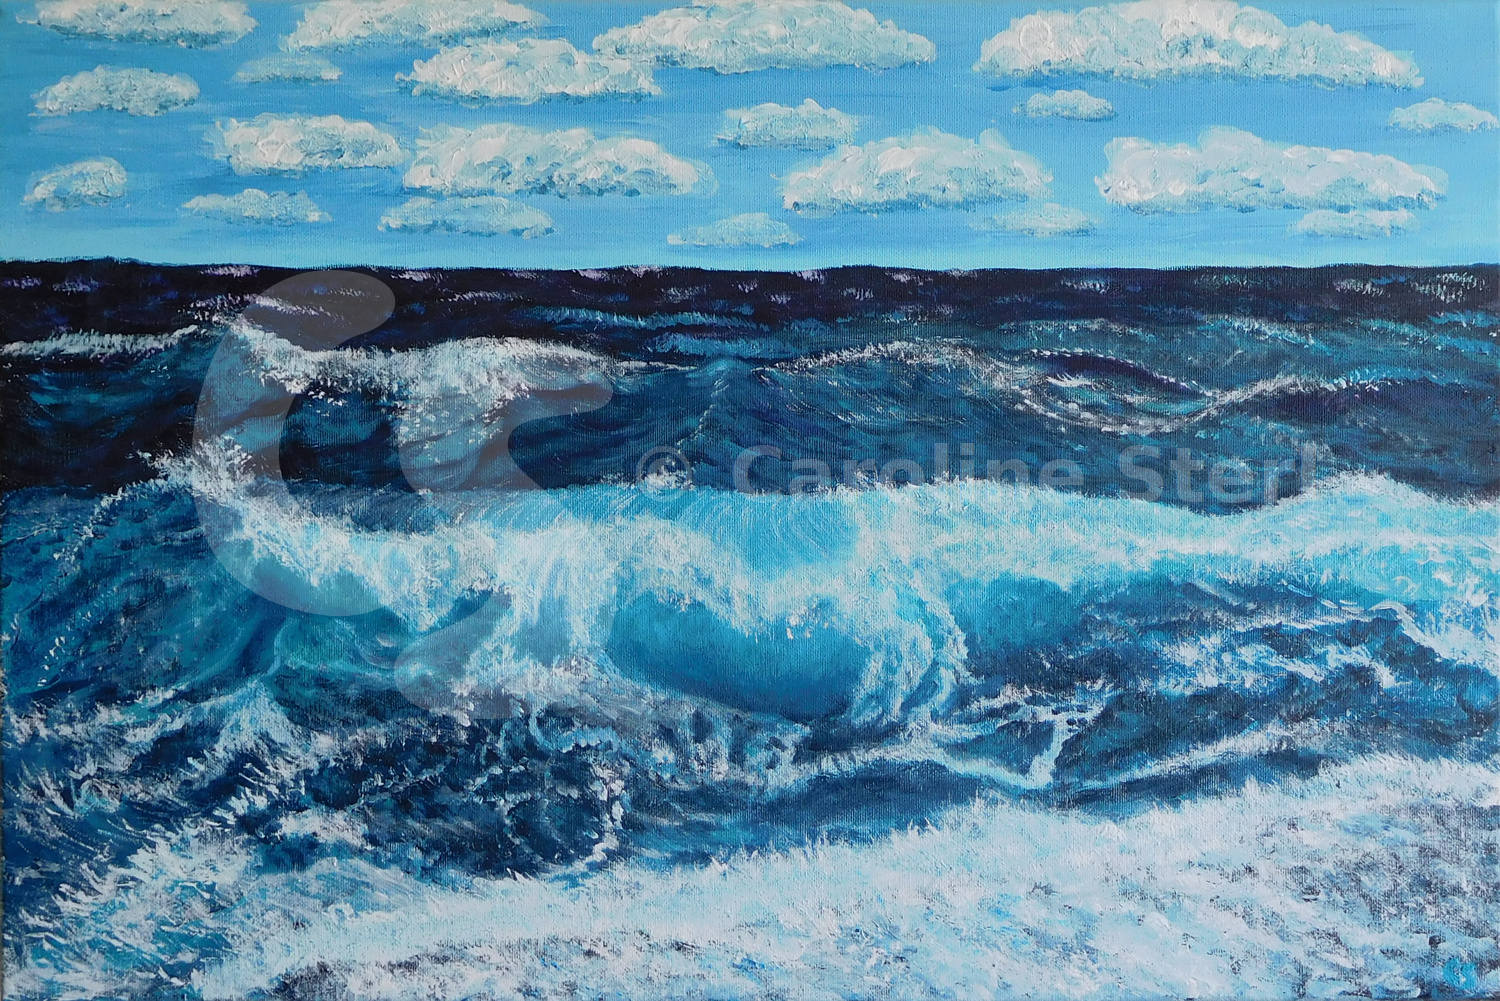 Painting: Waves